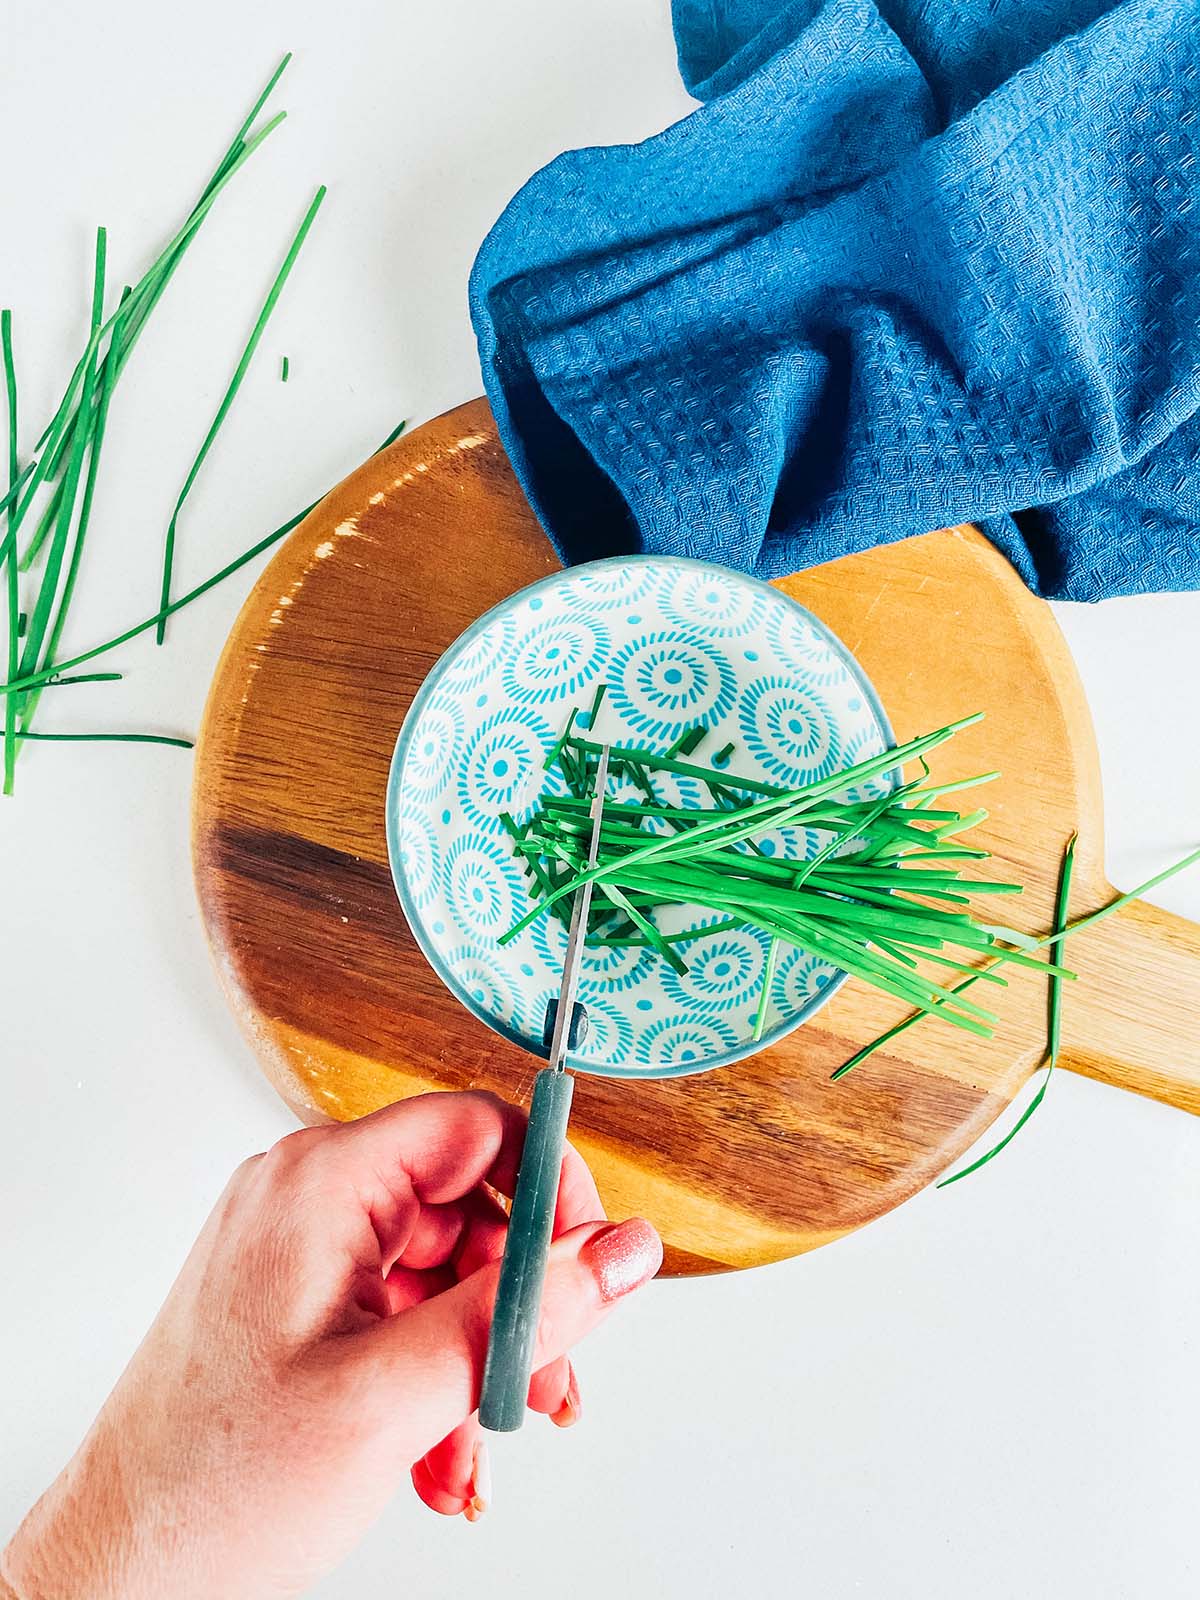 Chop the chives with scissors